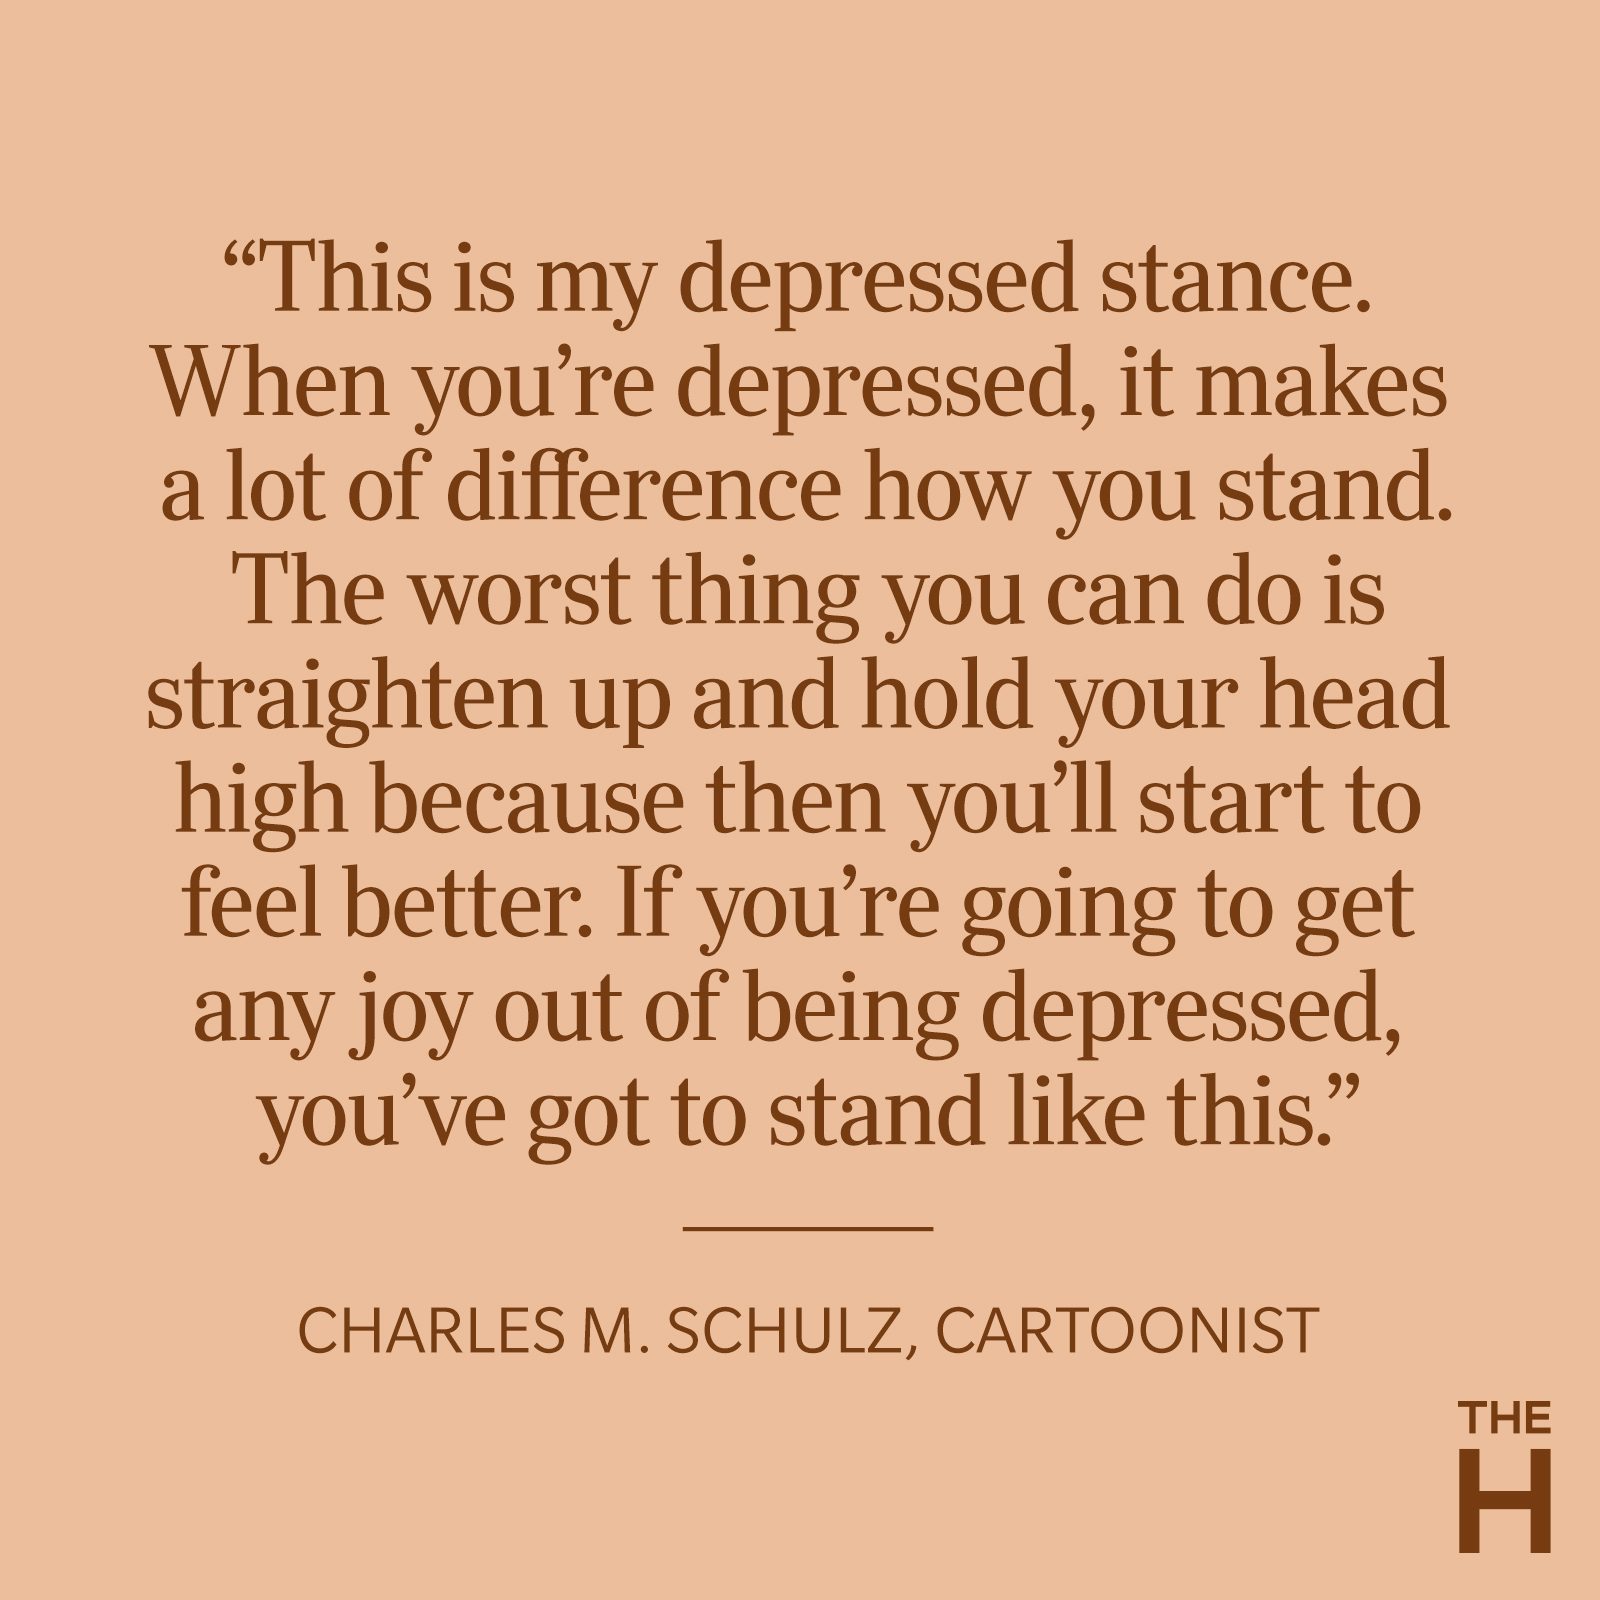 https://www.thehealthy.com/wp-content/uploads/2022/01/charles-m-schulz-quote.jpg?fit=700%2C700